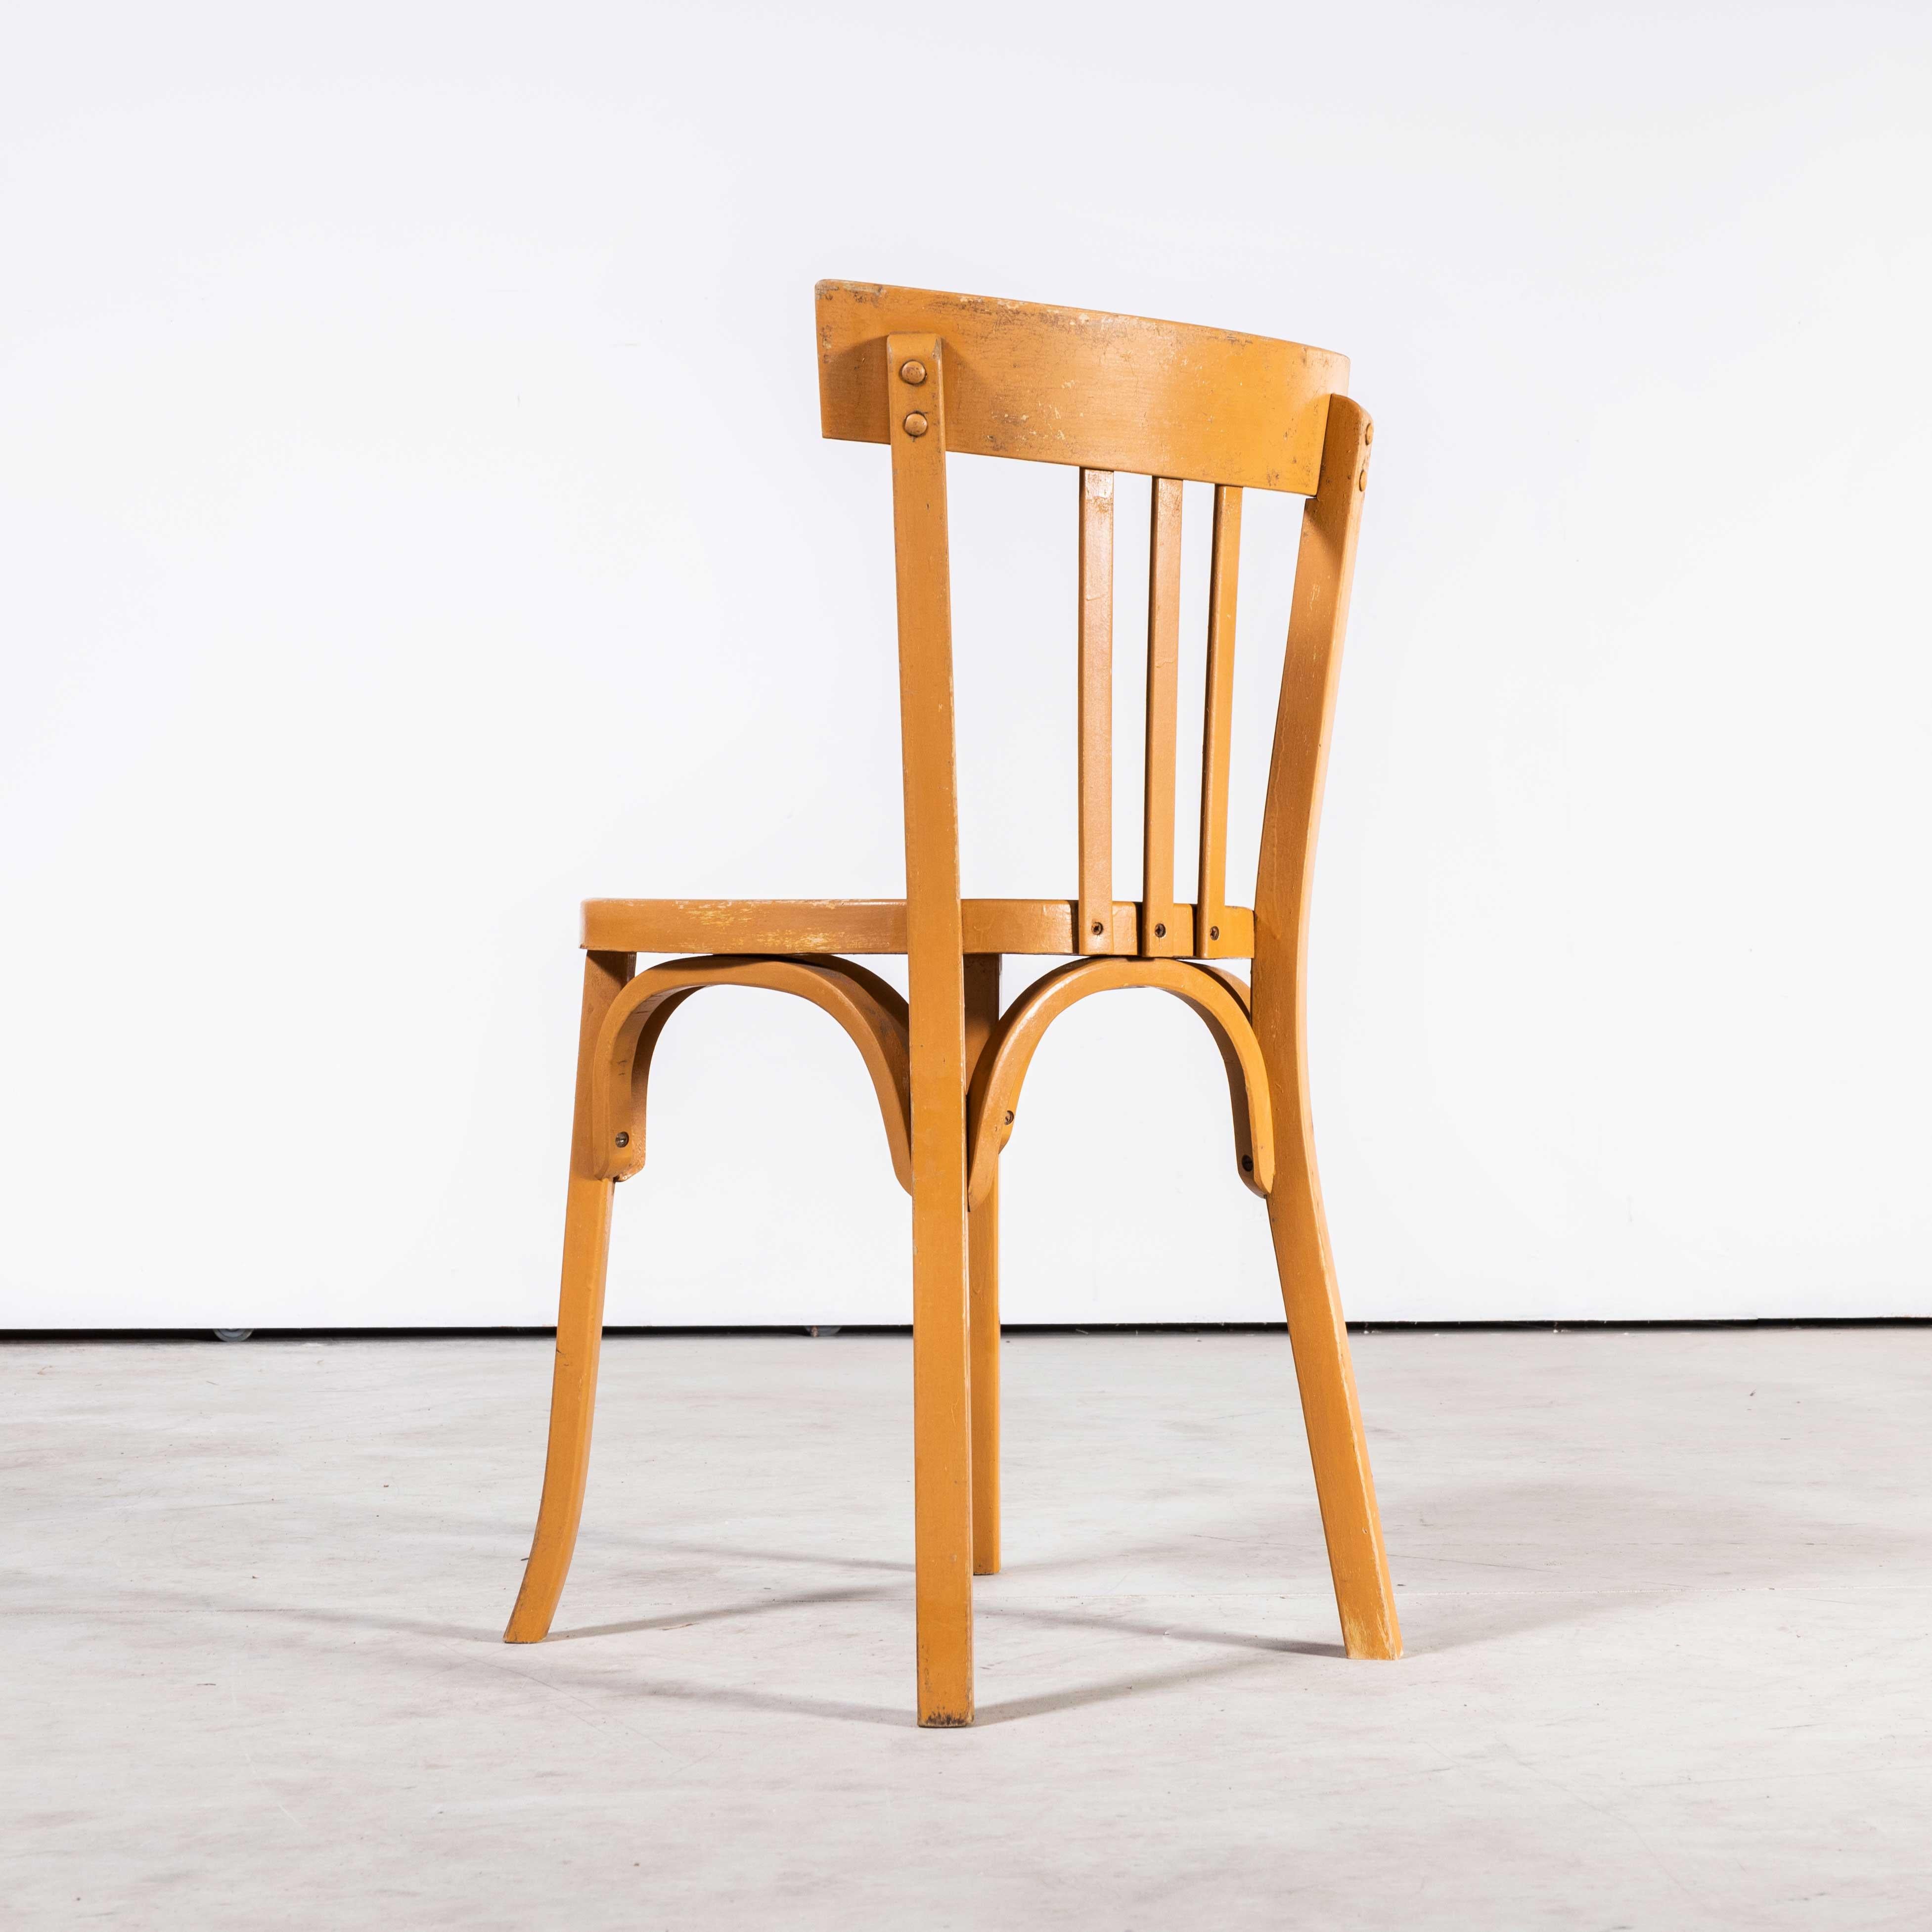 1950’s Baumann Bentwood Bistro Dining chair – Honey – Set Of Six
1950’s Baumann Bentwood Bistro Dining chair – Honey – Set Of Six. Classic beech bistro chair made in France by the maker Baumann. Baumann is a slightly off the radar French producer